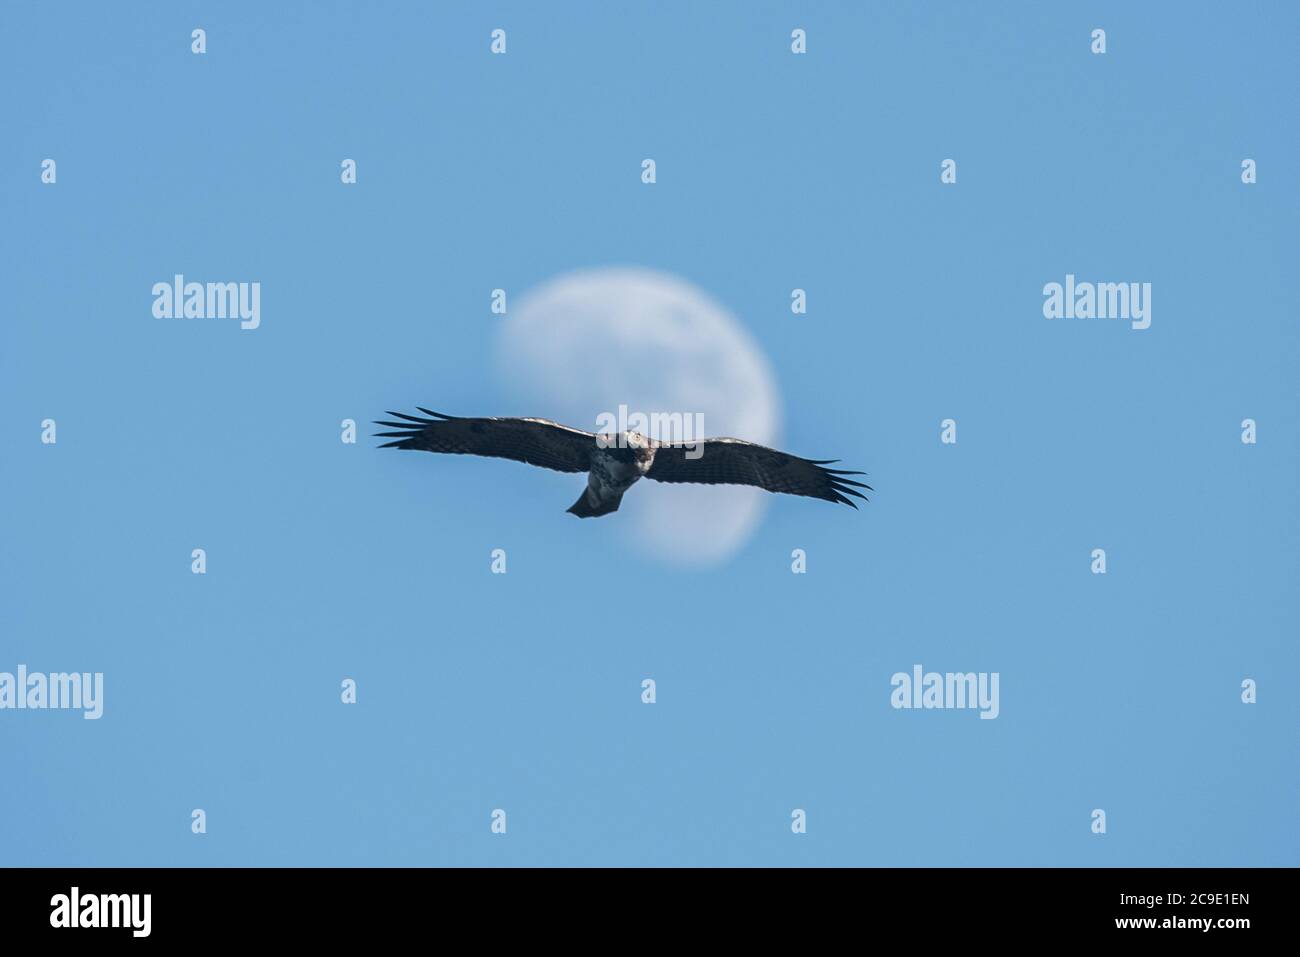 A red tailed hawk (Buteo jamaicensis) flies in front of the moon. Stock Photo